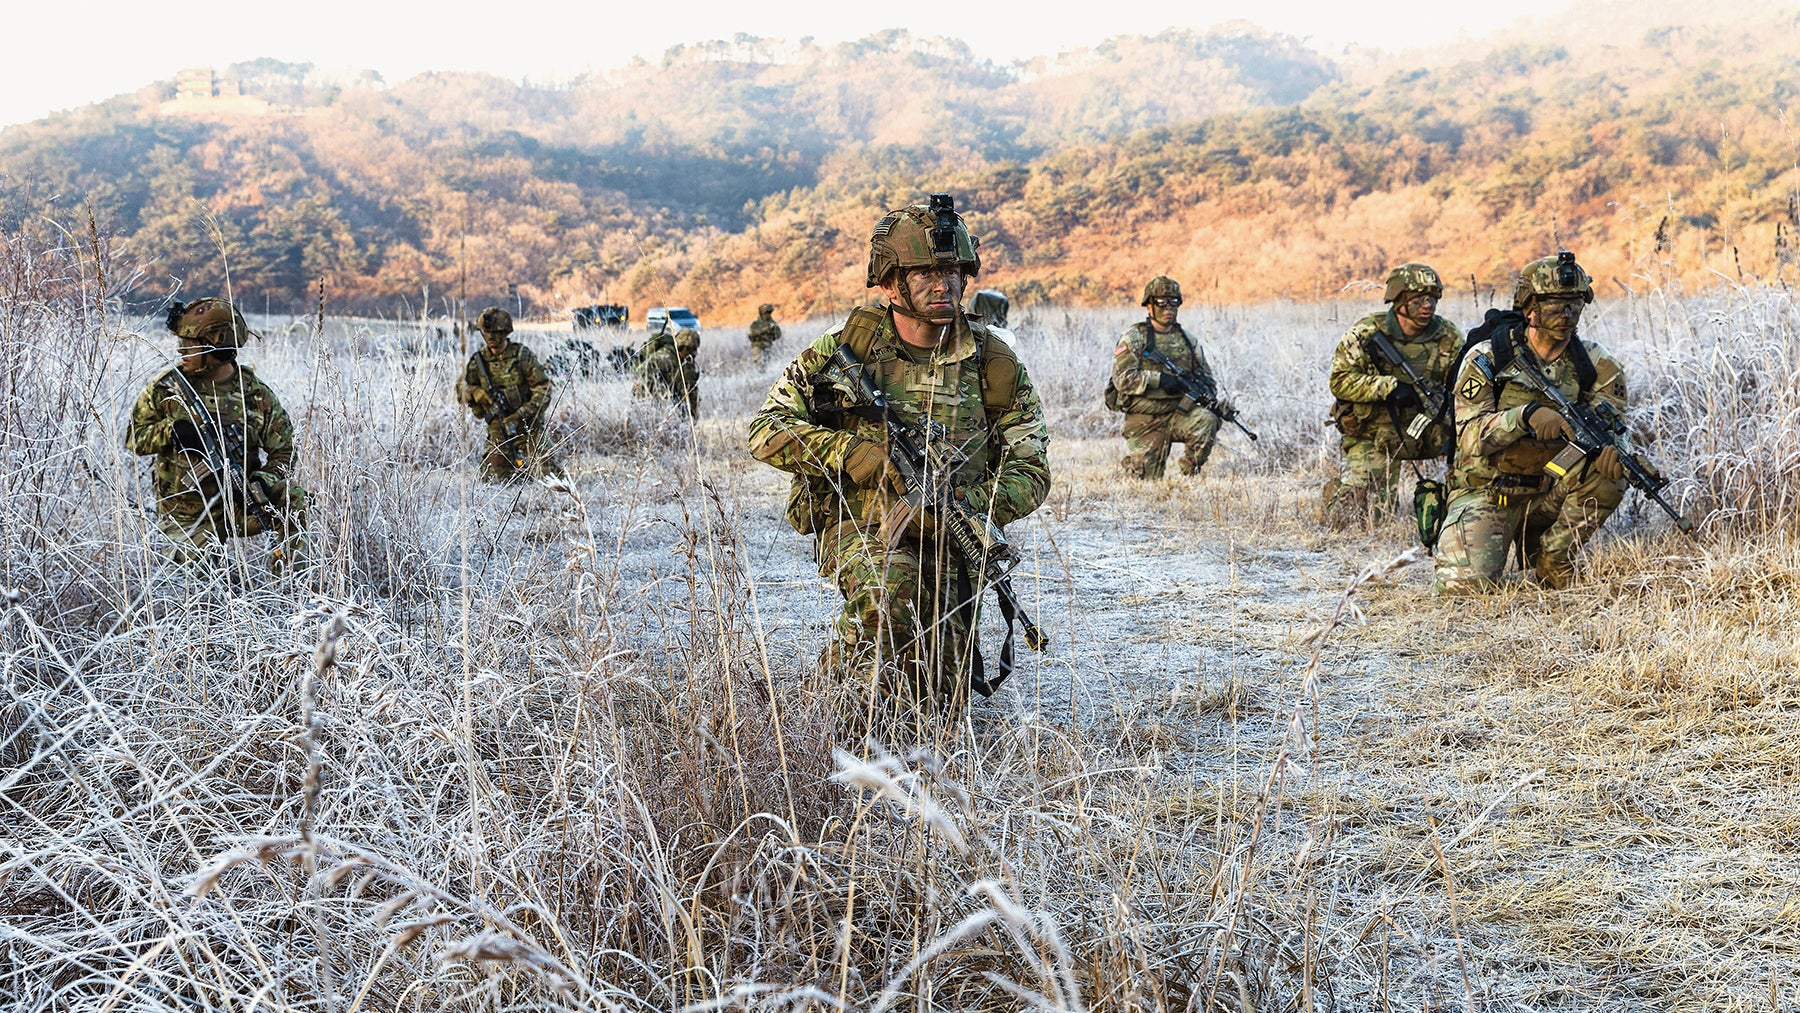 Soldiers with the 2nd Stryker Brigade Combat Team, 4th Infantry Division, pull security during an exercise at Rodriguez Live Fire Complex, South Korea. (Credit: U.S. Army Reserve/Sgt. Alexander Kelly)